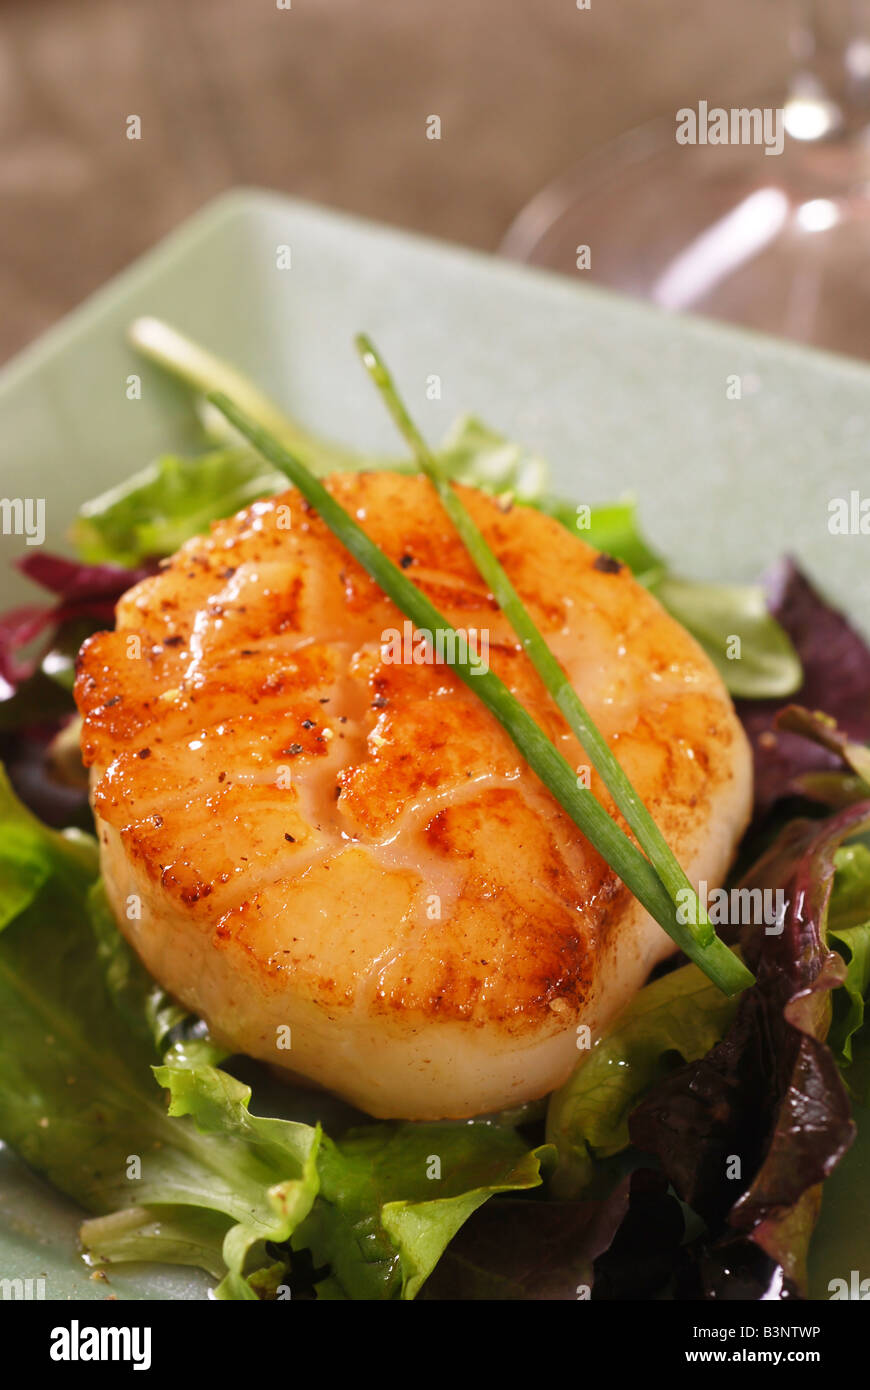 Scallop with field greens on a dinner plate Stock Photo